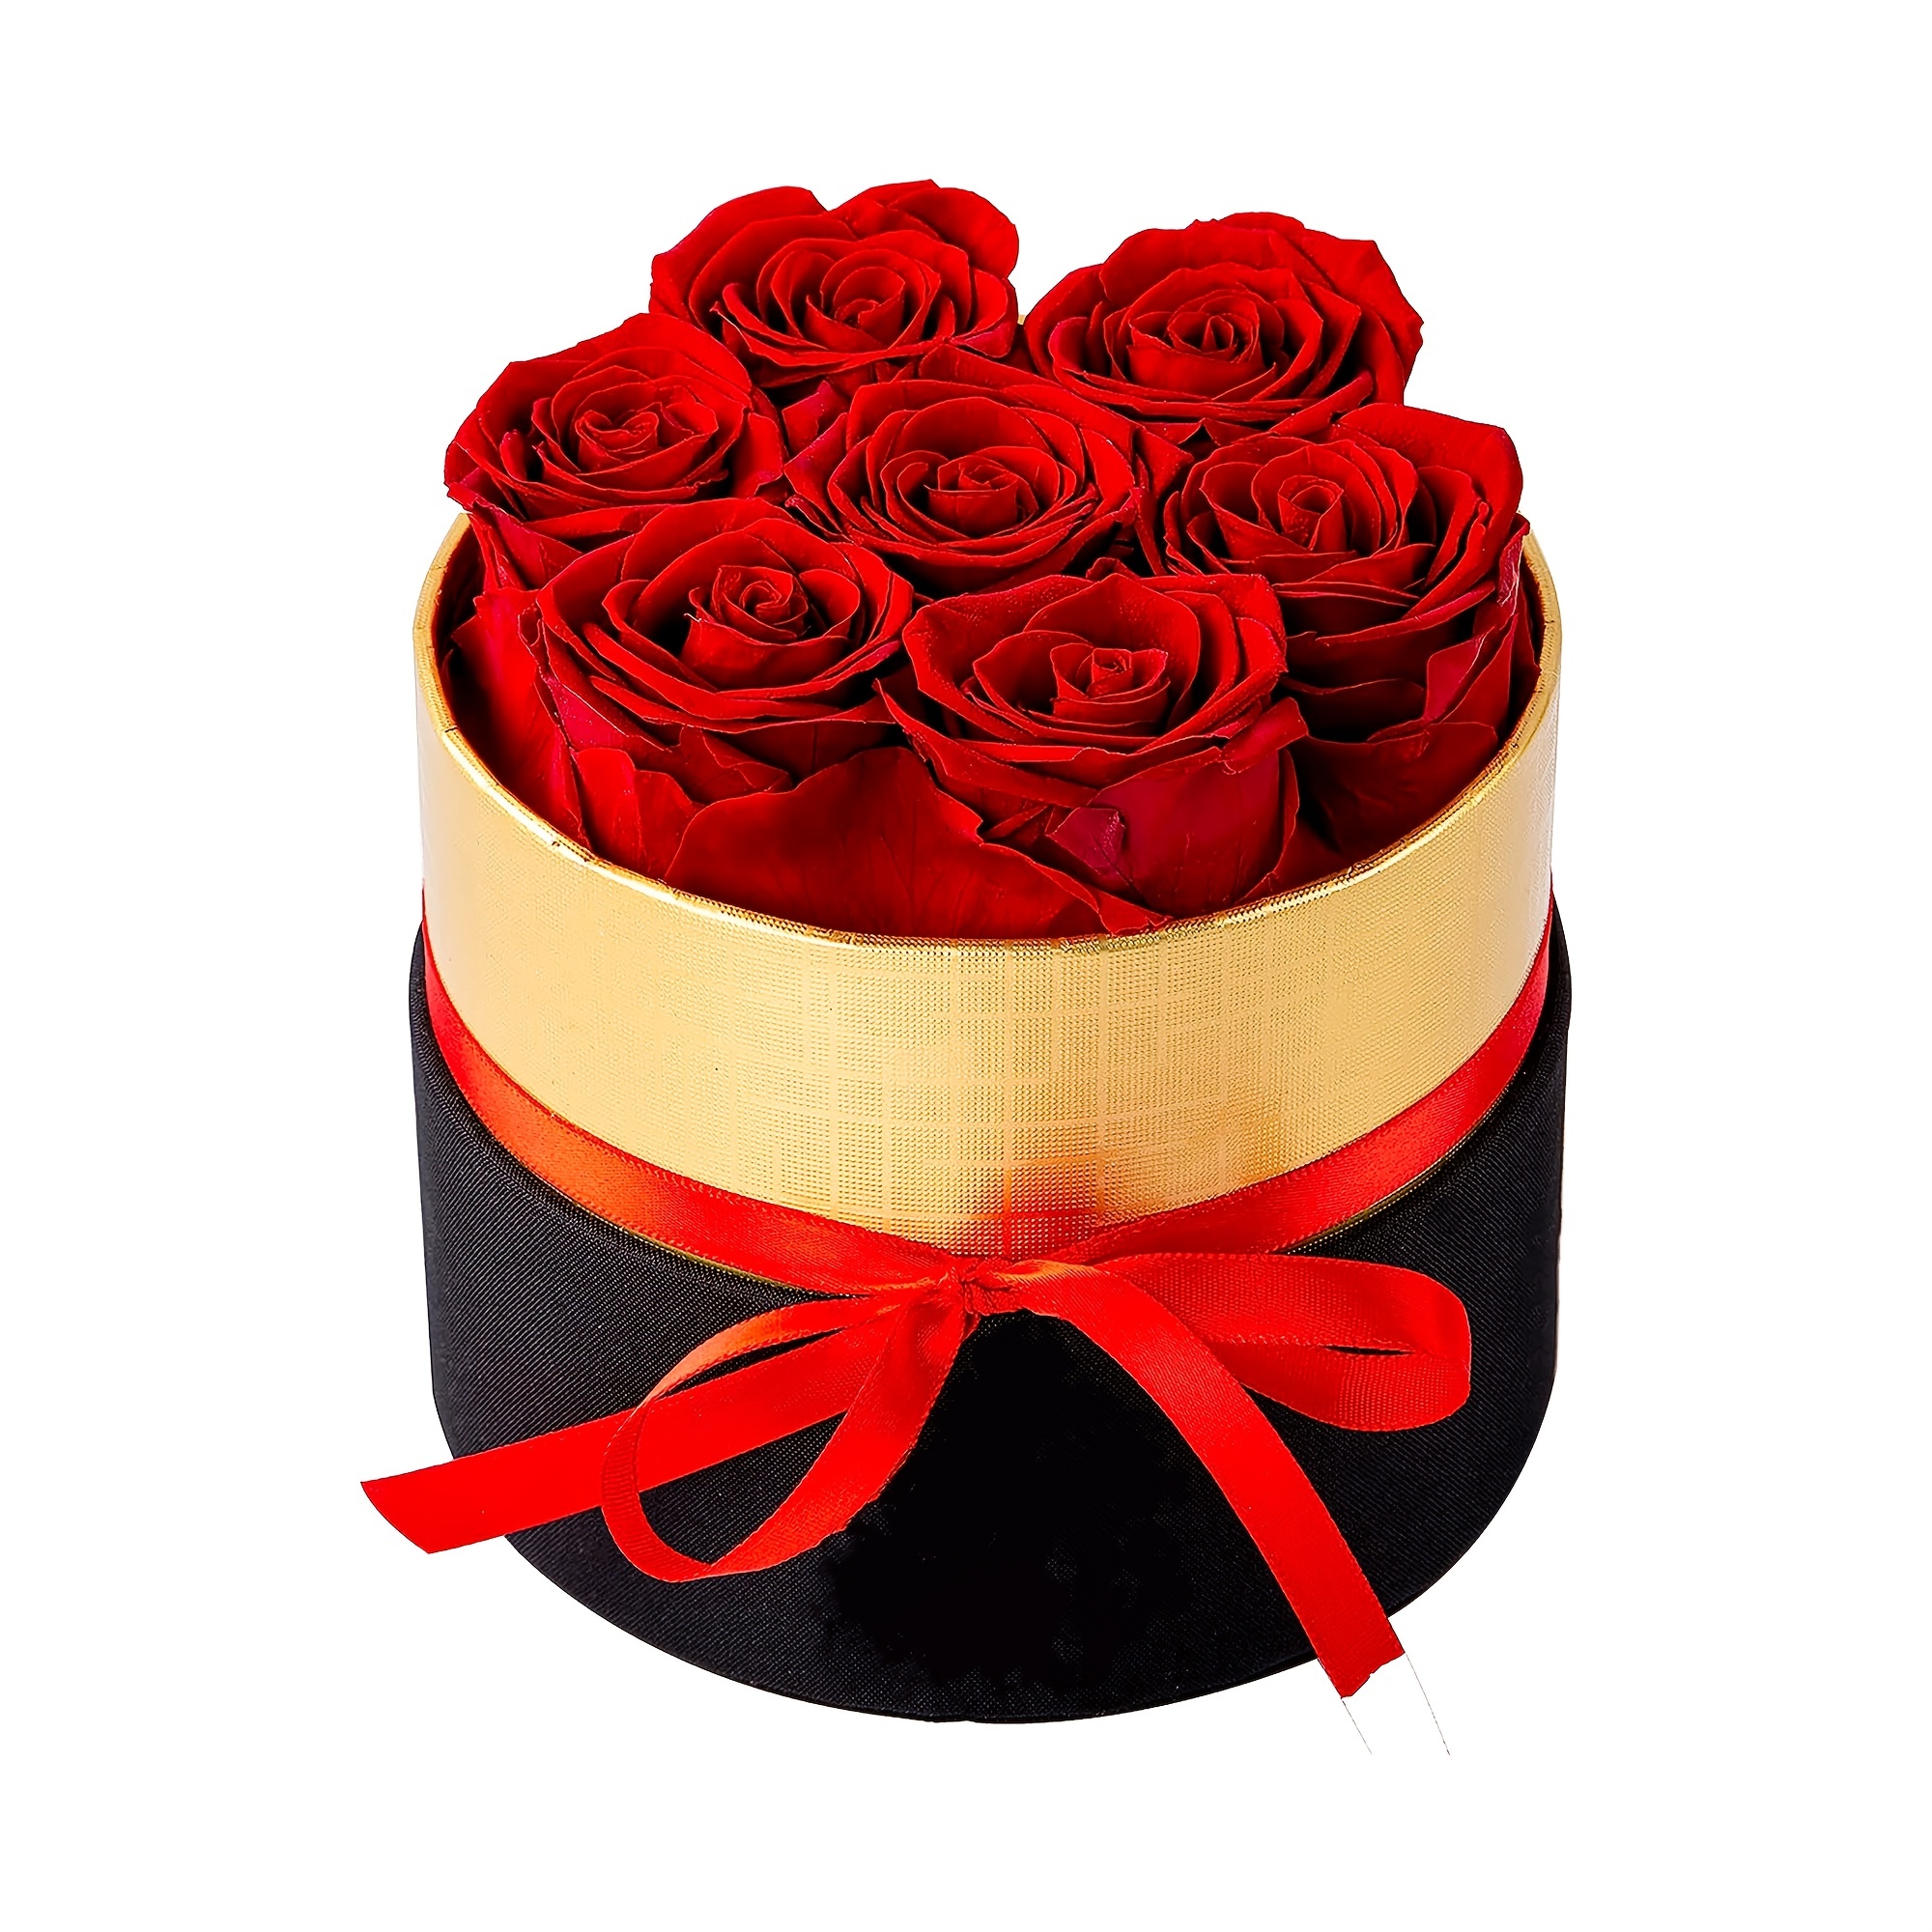 Petite Round Black Hat Box with Single Red Everlasting Preserved Rose | The Only Roses